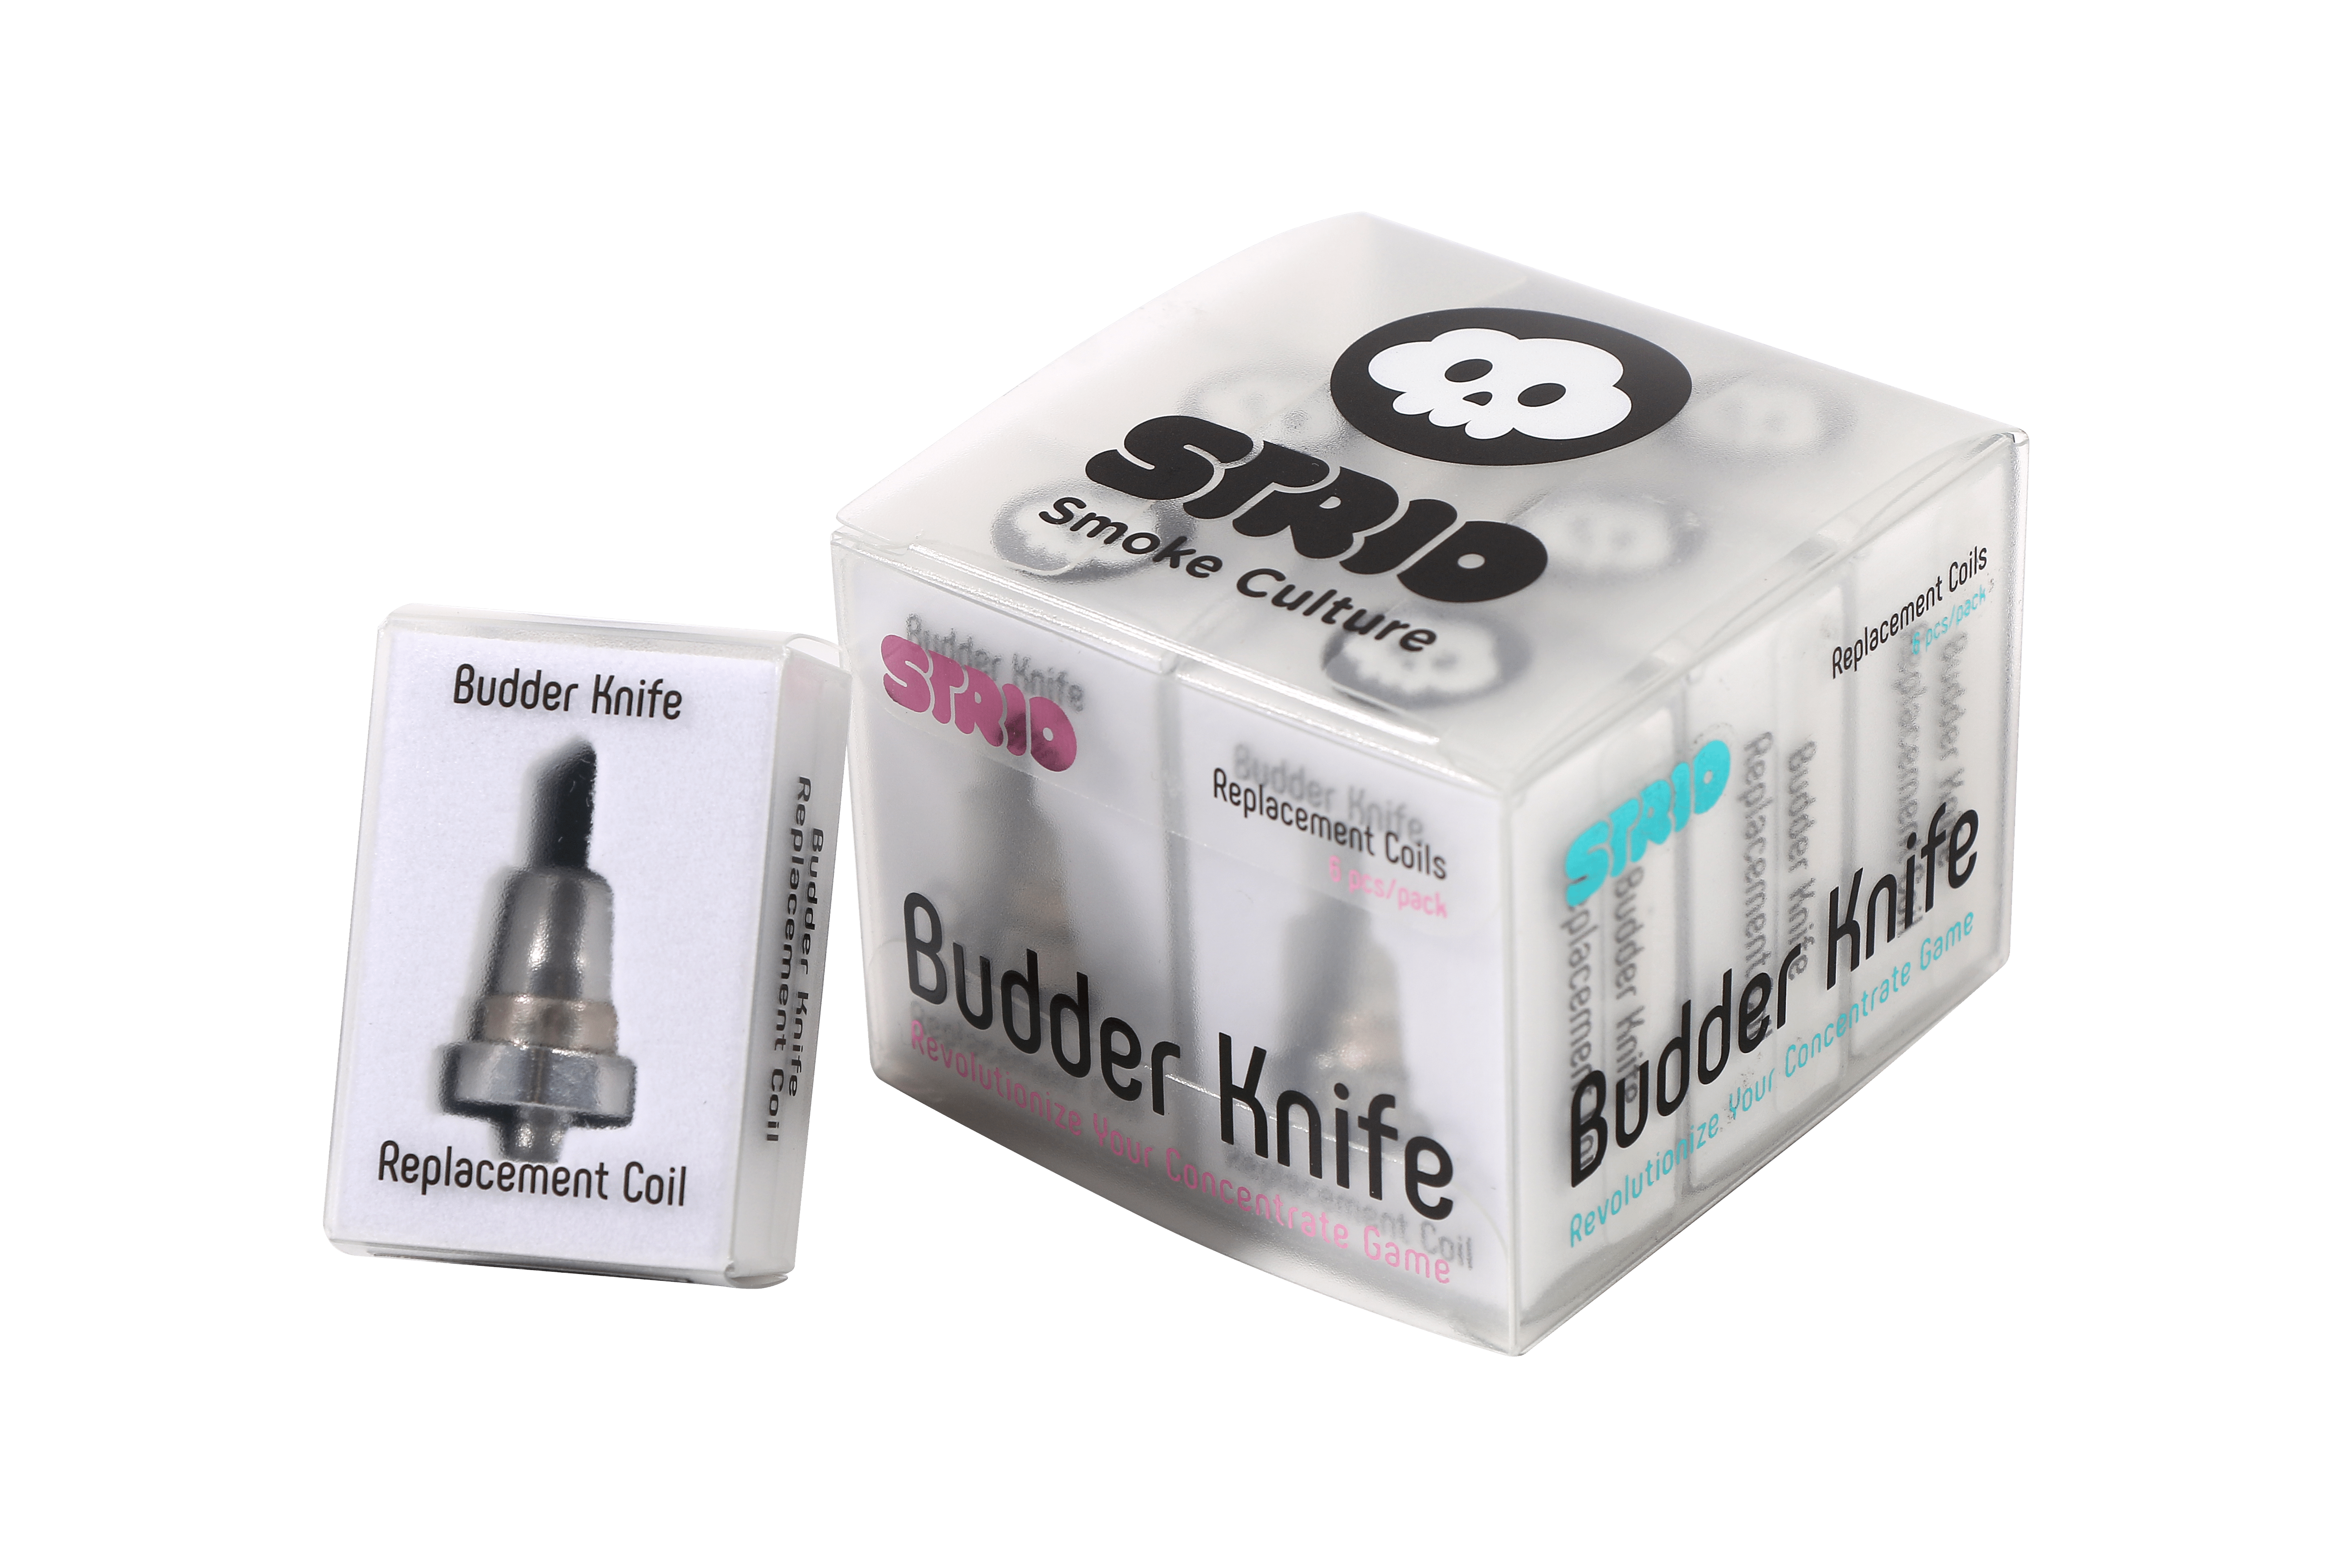 Budder Knife Replacement Coil - Strio